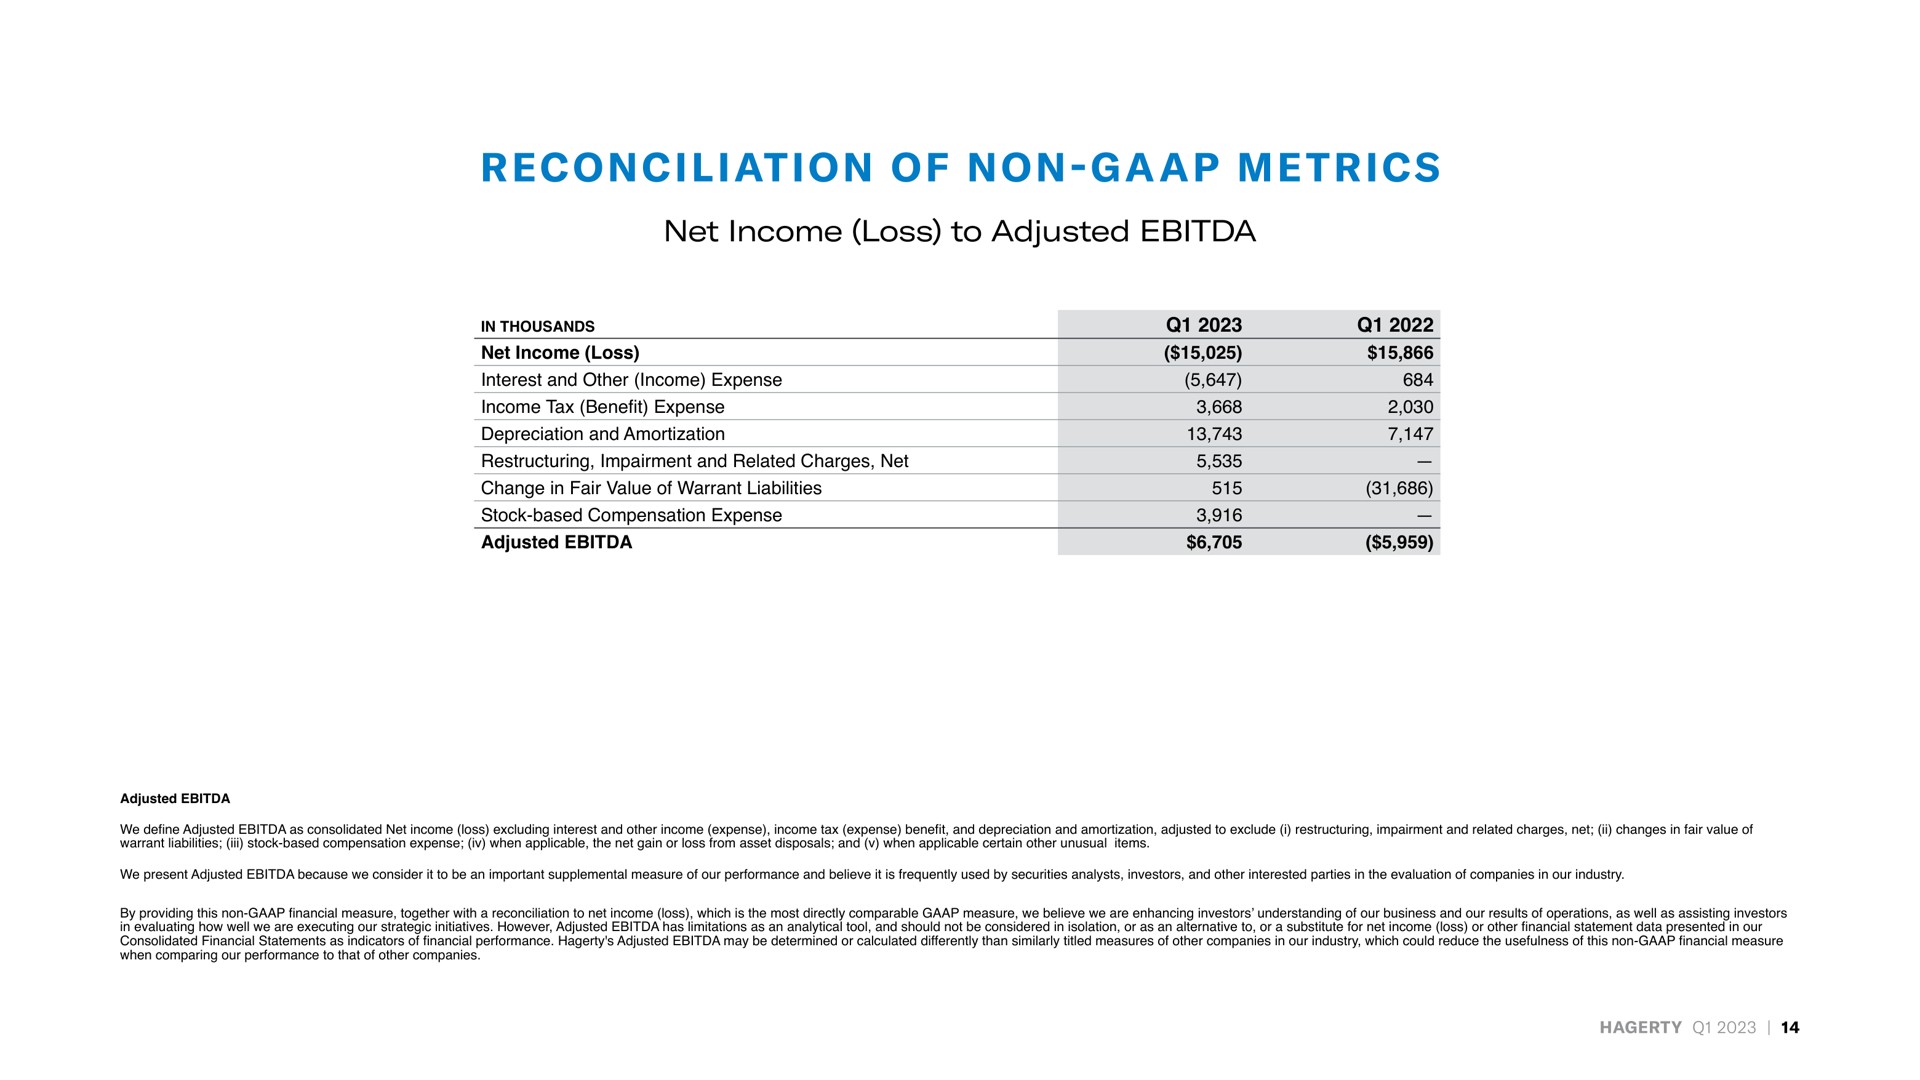 reconciliation of non metrics net income loss to adjusted in thousands net income loss | Hagerty